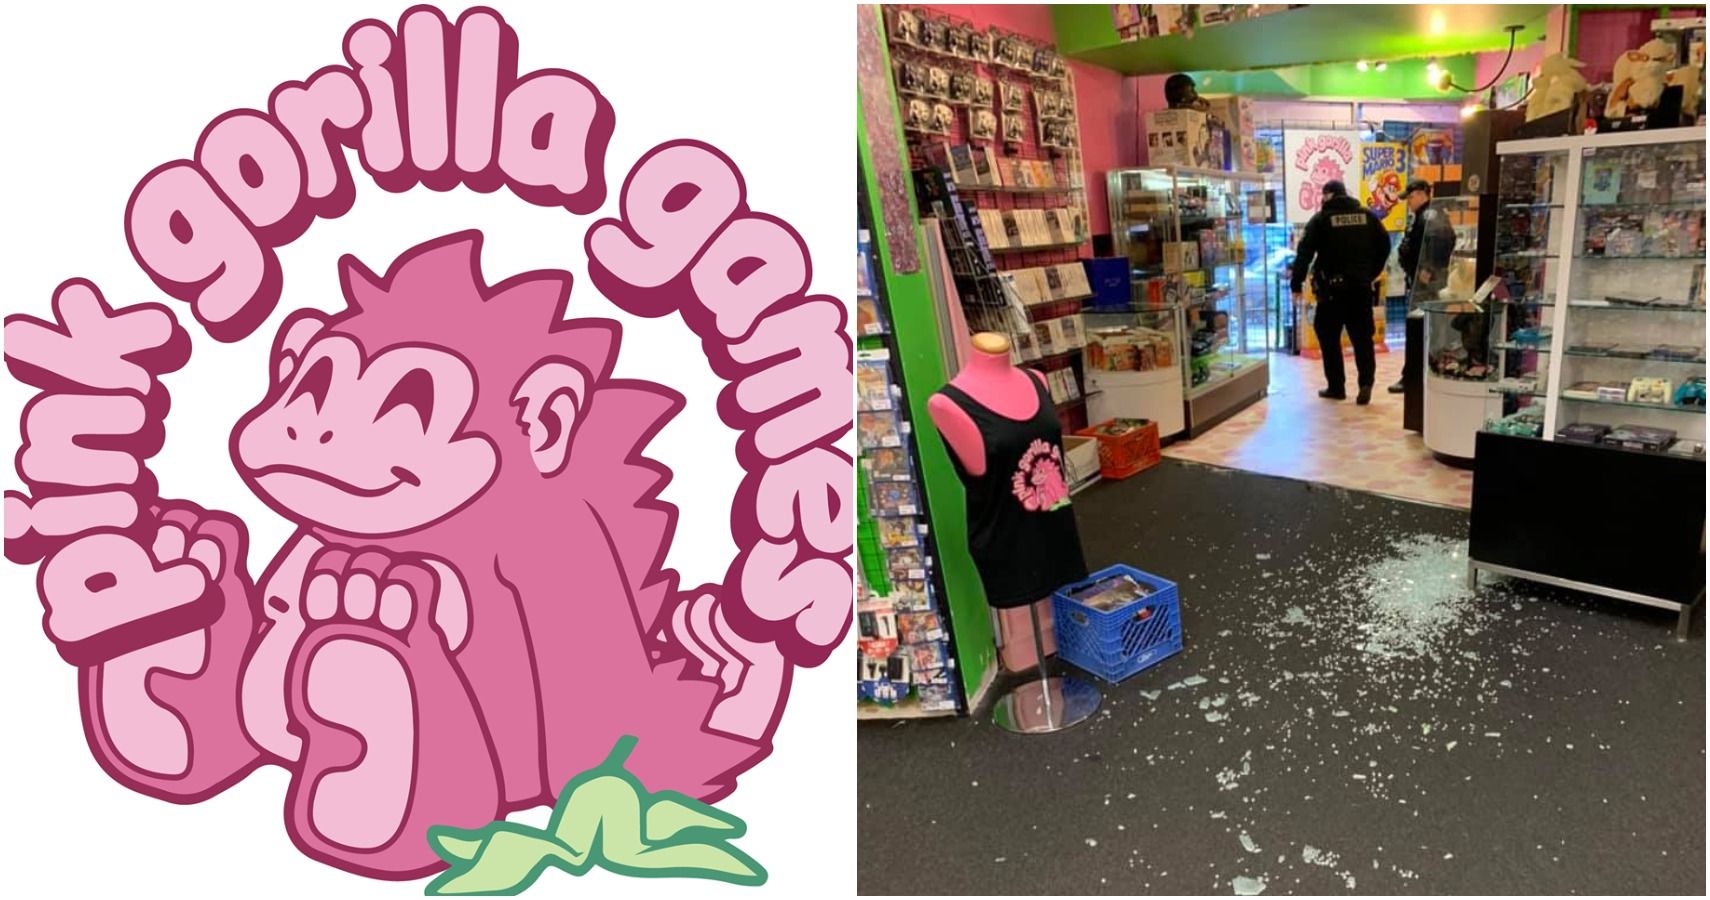 World famous Gaming Store Pink Gorilla Was Robbed Last Weekend